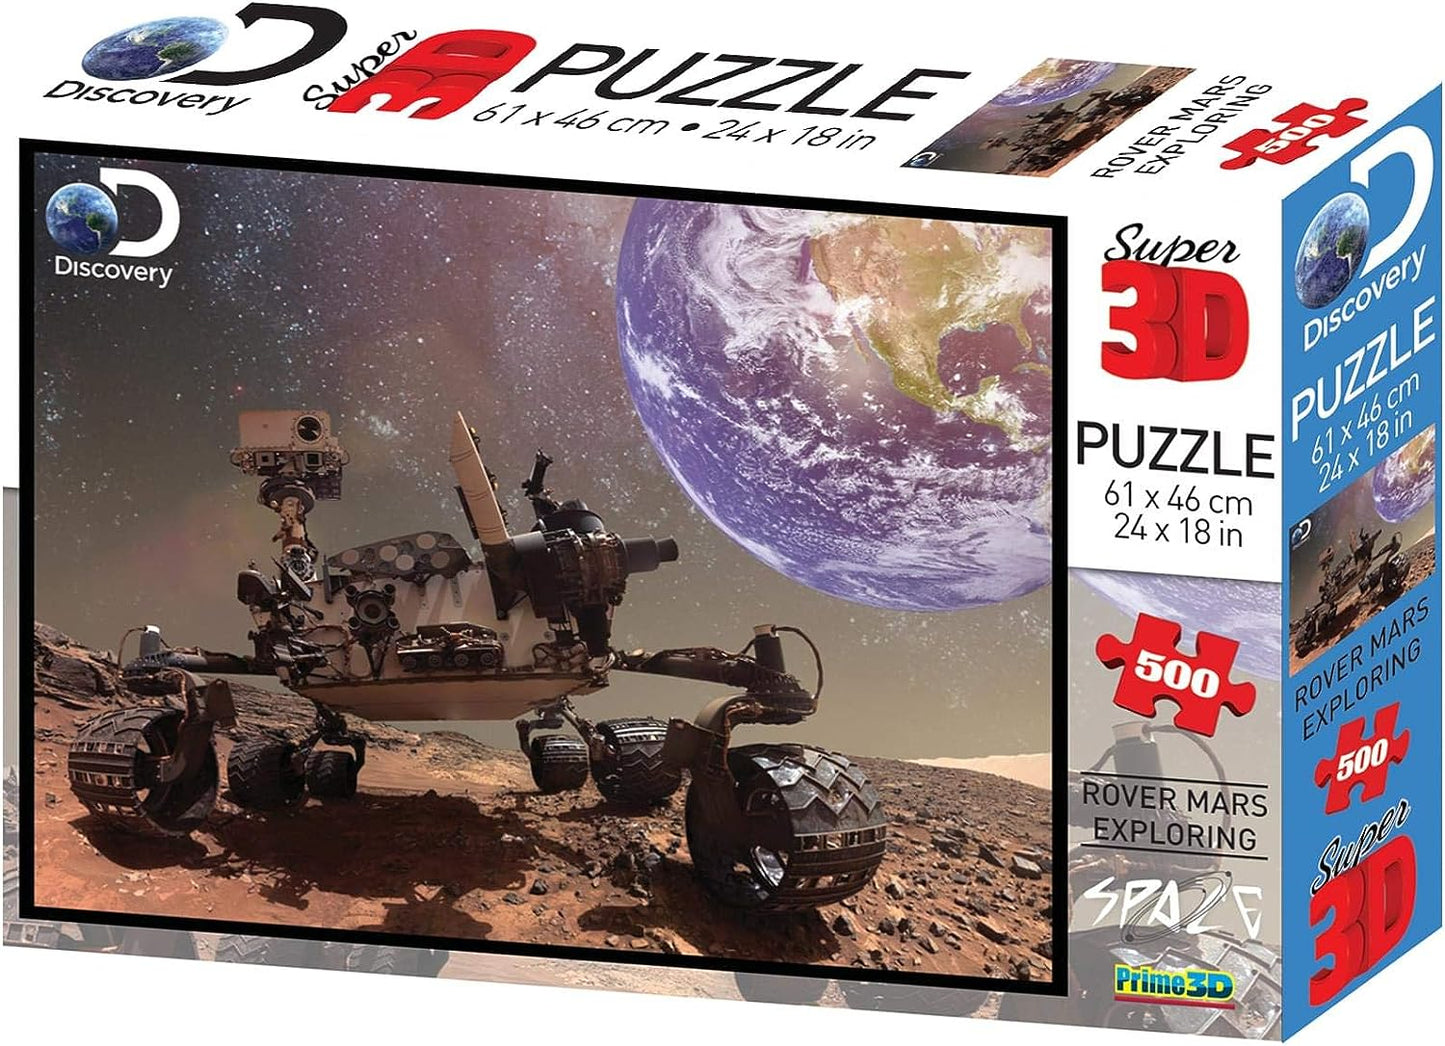 DISCOVERY CHANNEL 3D Kids Puzzle 500pc View From Mars